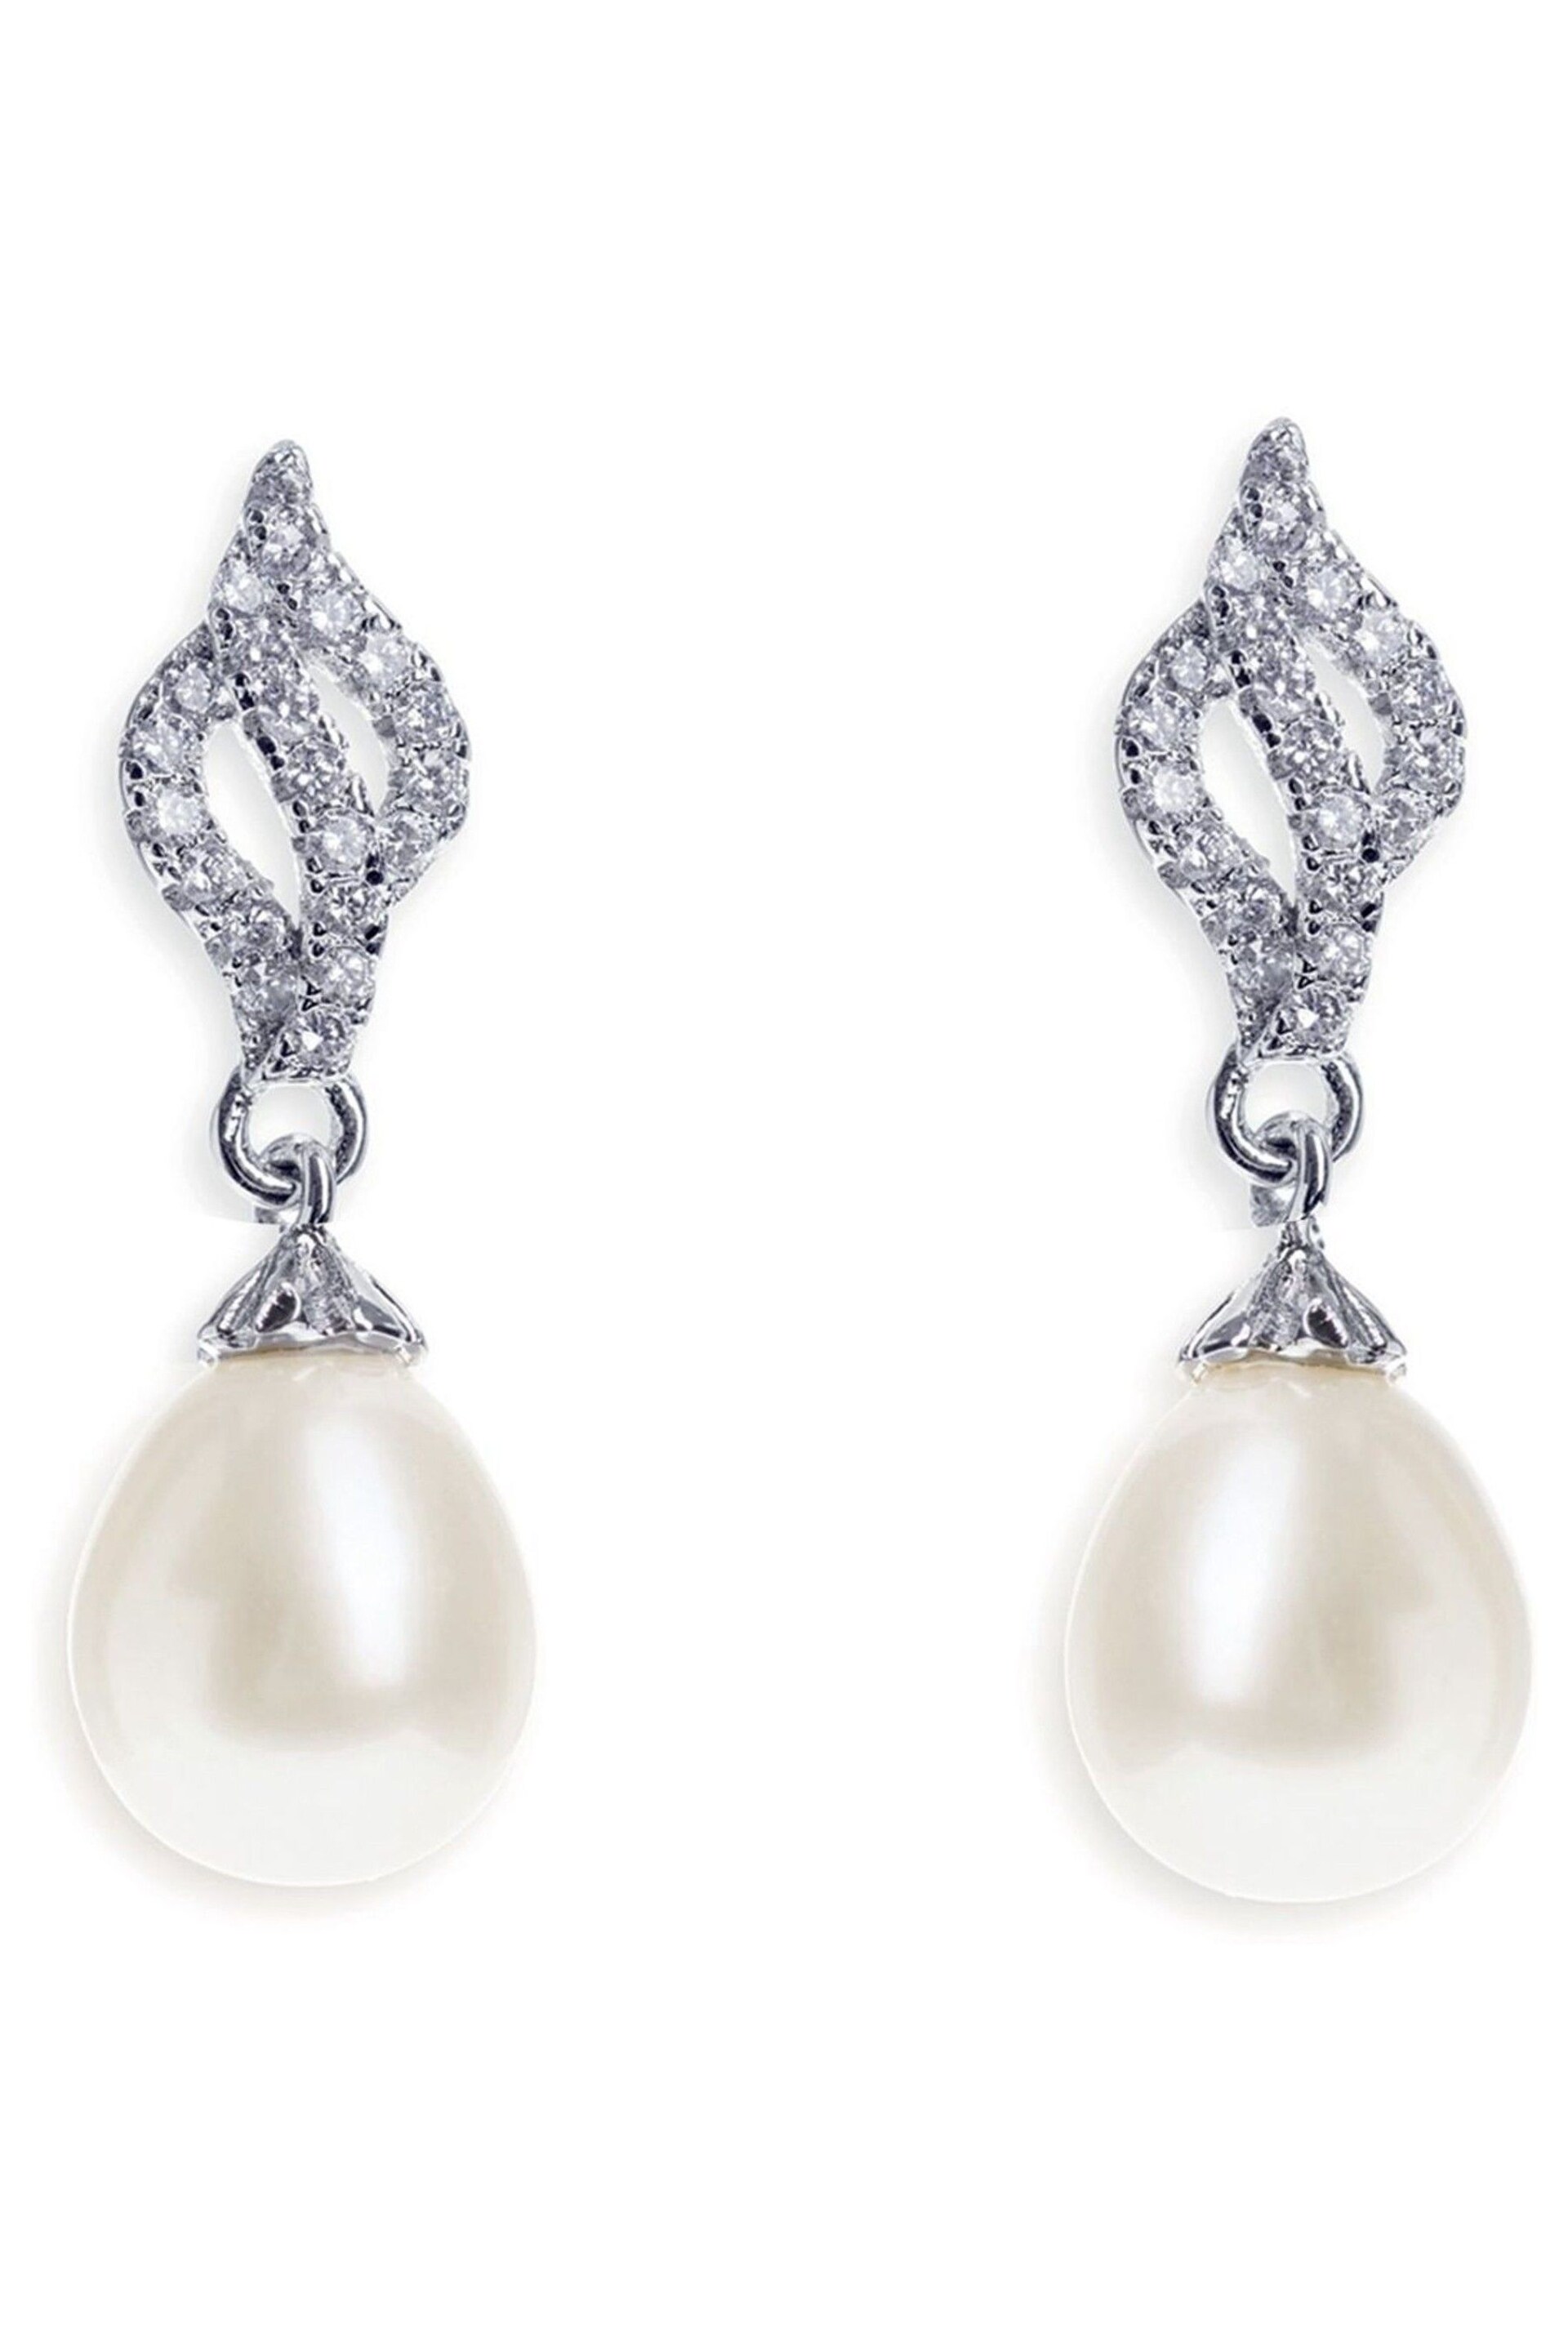 Ivory & Co Rhodiium Lisbon Crystal And Pearl Romantic Earrings - Image 1 of 5